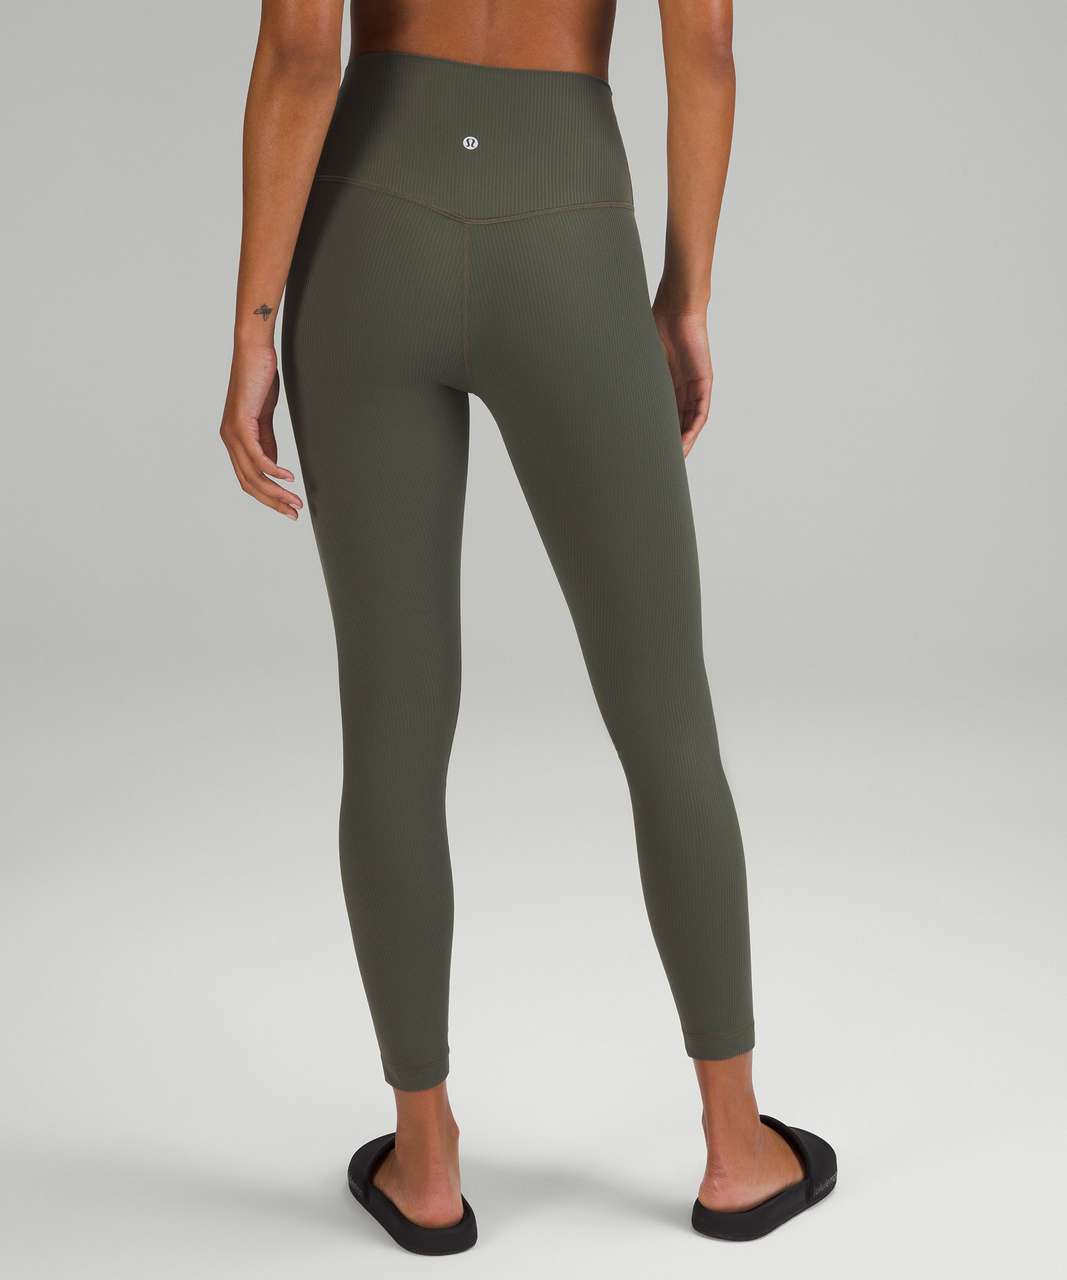 Lululemon Align Ribbed High-Rise Pant 25" - Army Green